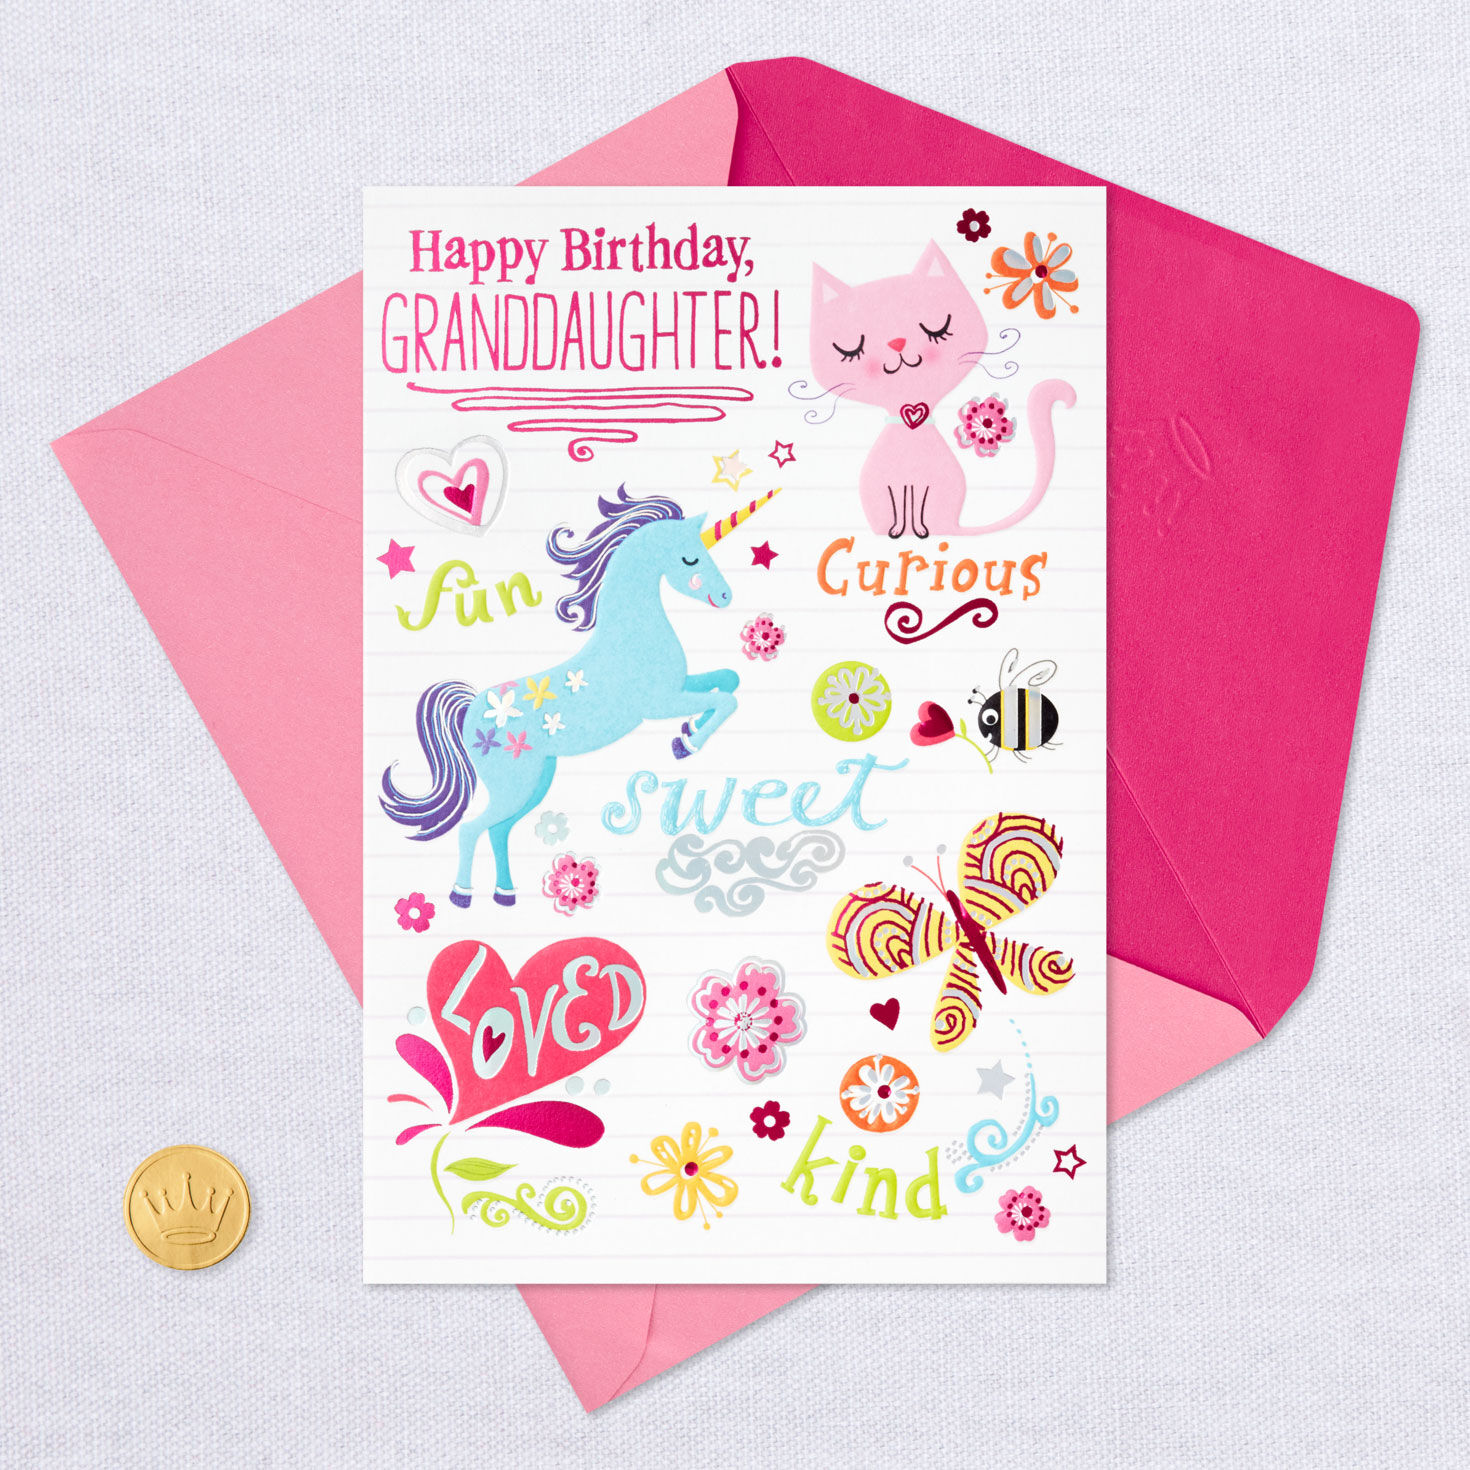 Happier, Brighter and Sweeter Birthday Card for Granddaughter for only USD 3.99 | Hallmark